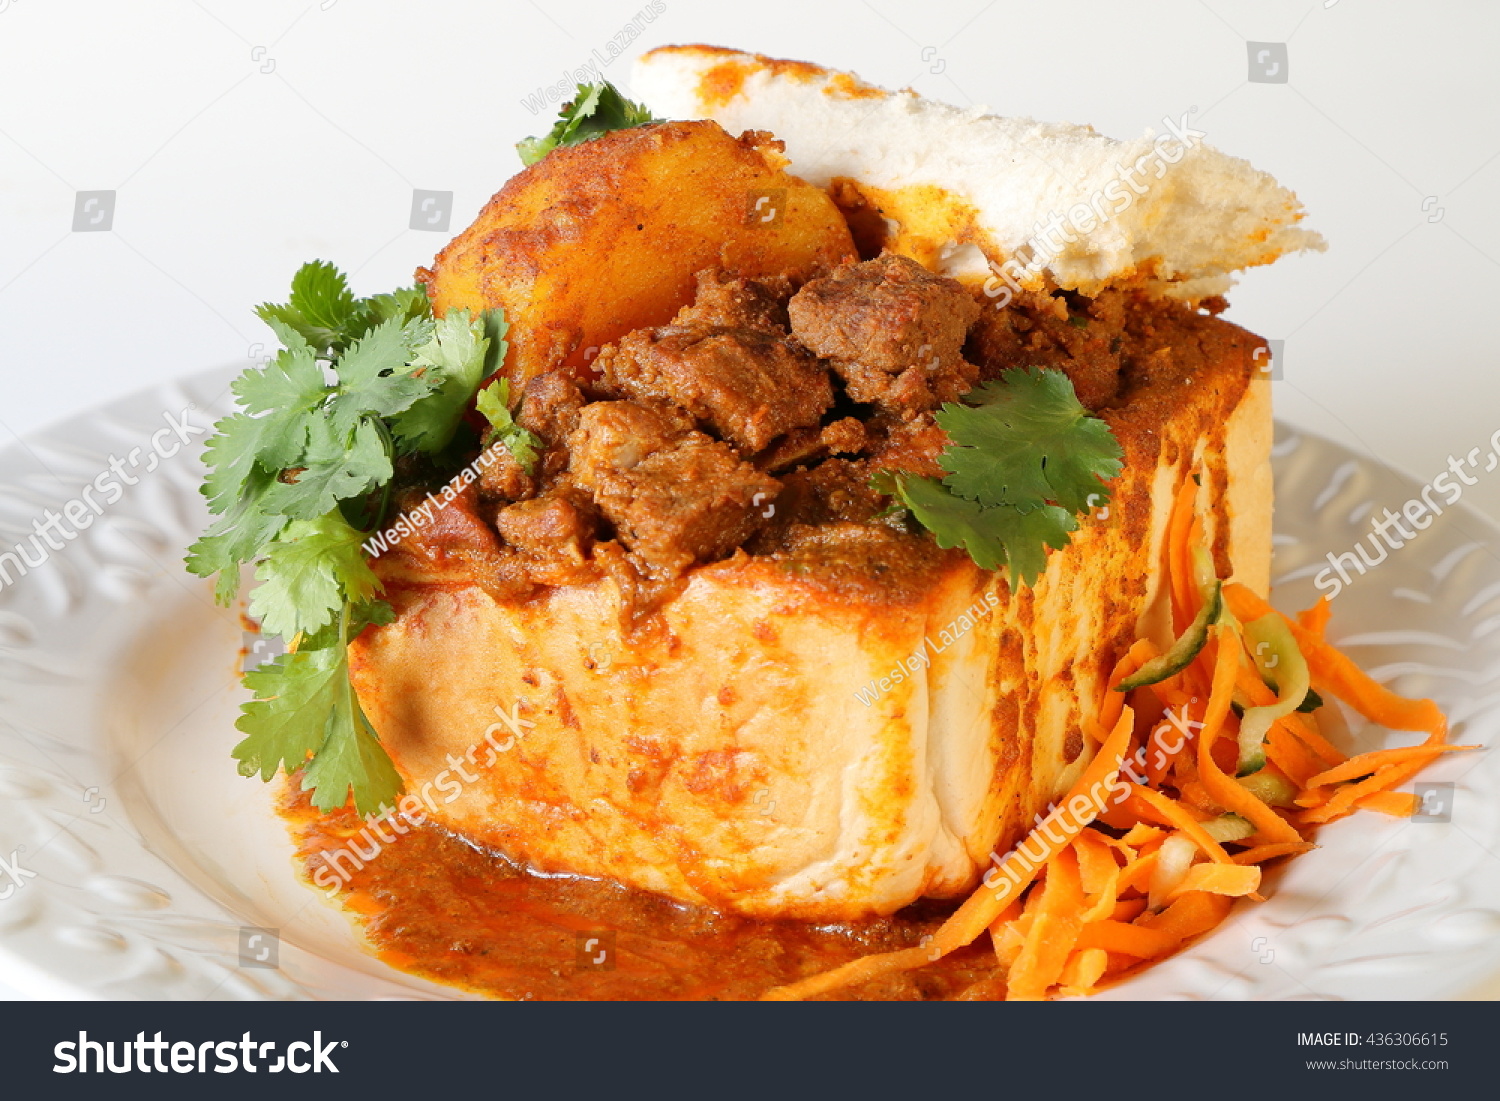 Closeup of lamb "bunny chow" - the popular, Indian fast food cuisine which originated in South Africa, with carrot salad  #436306615